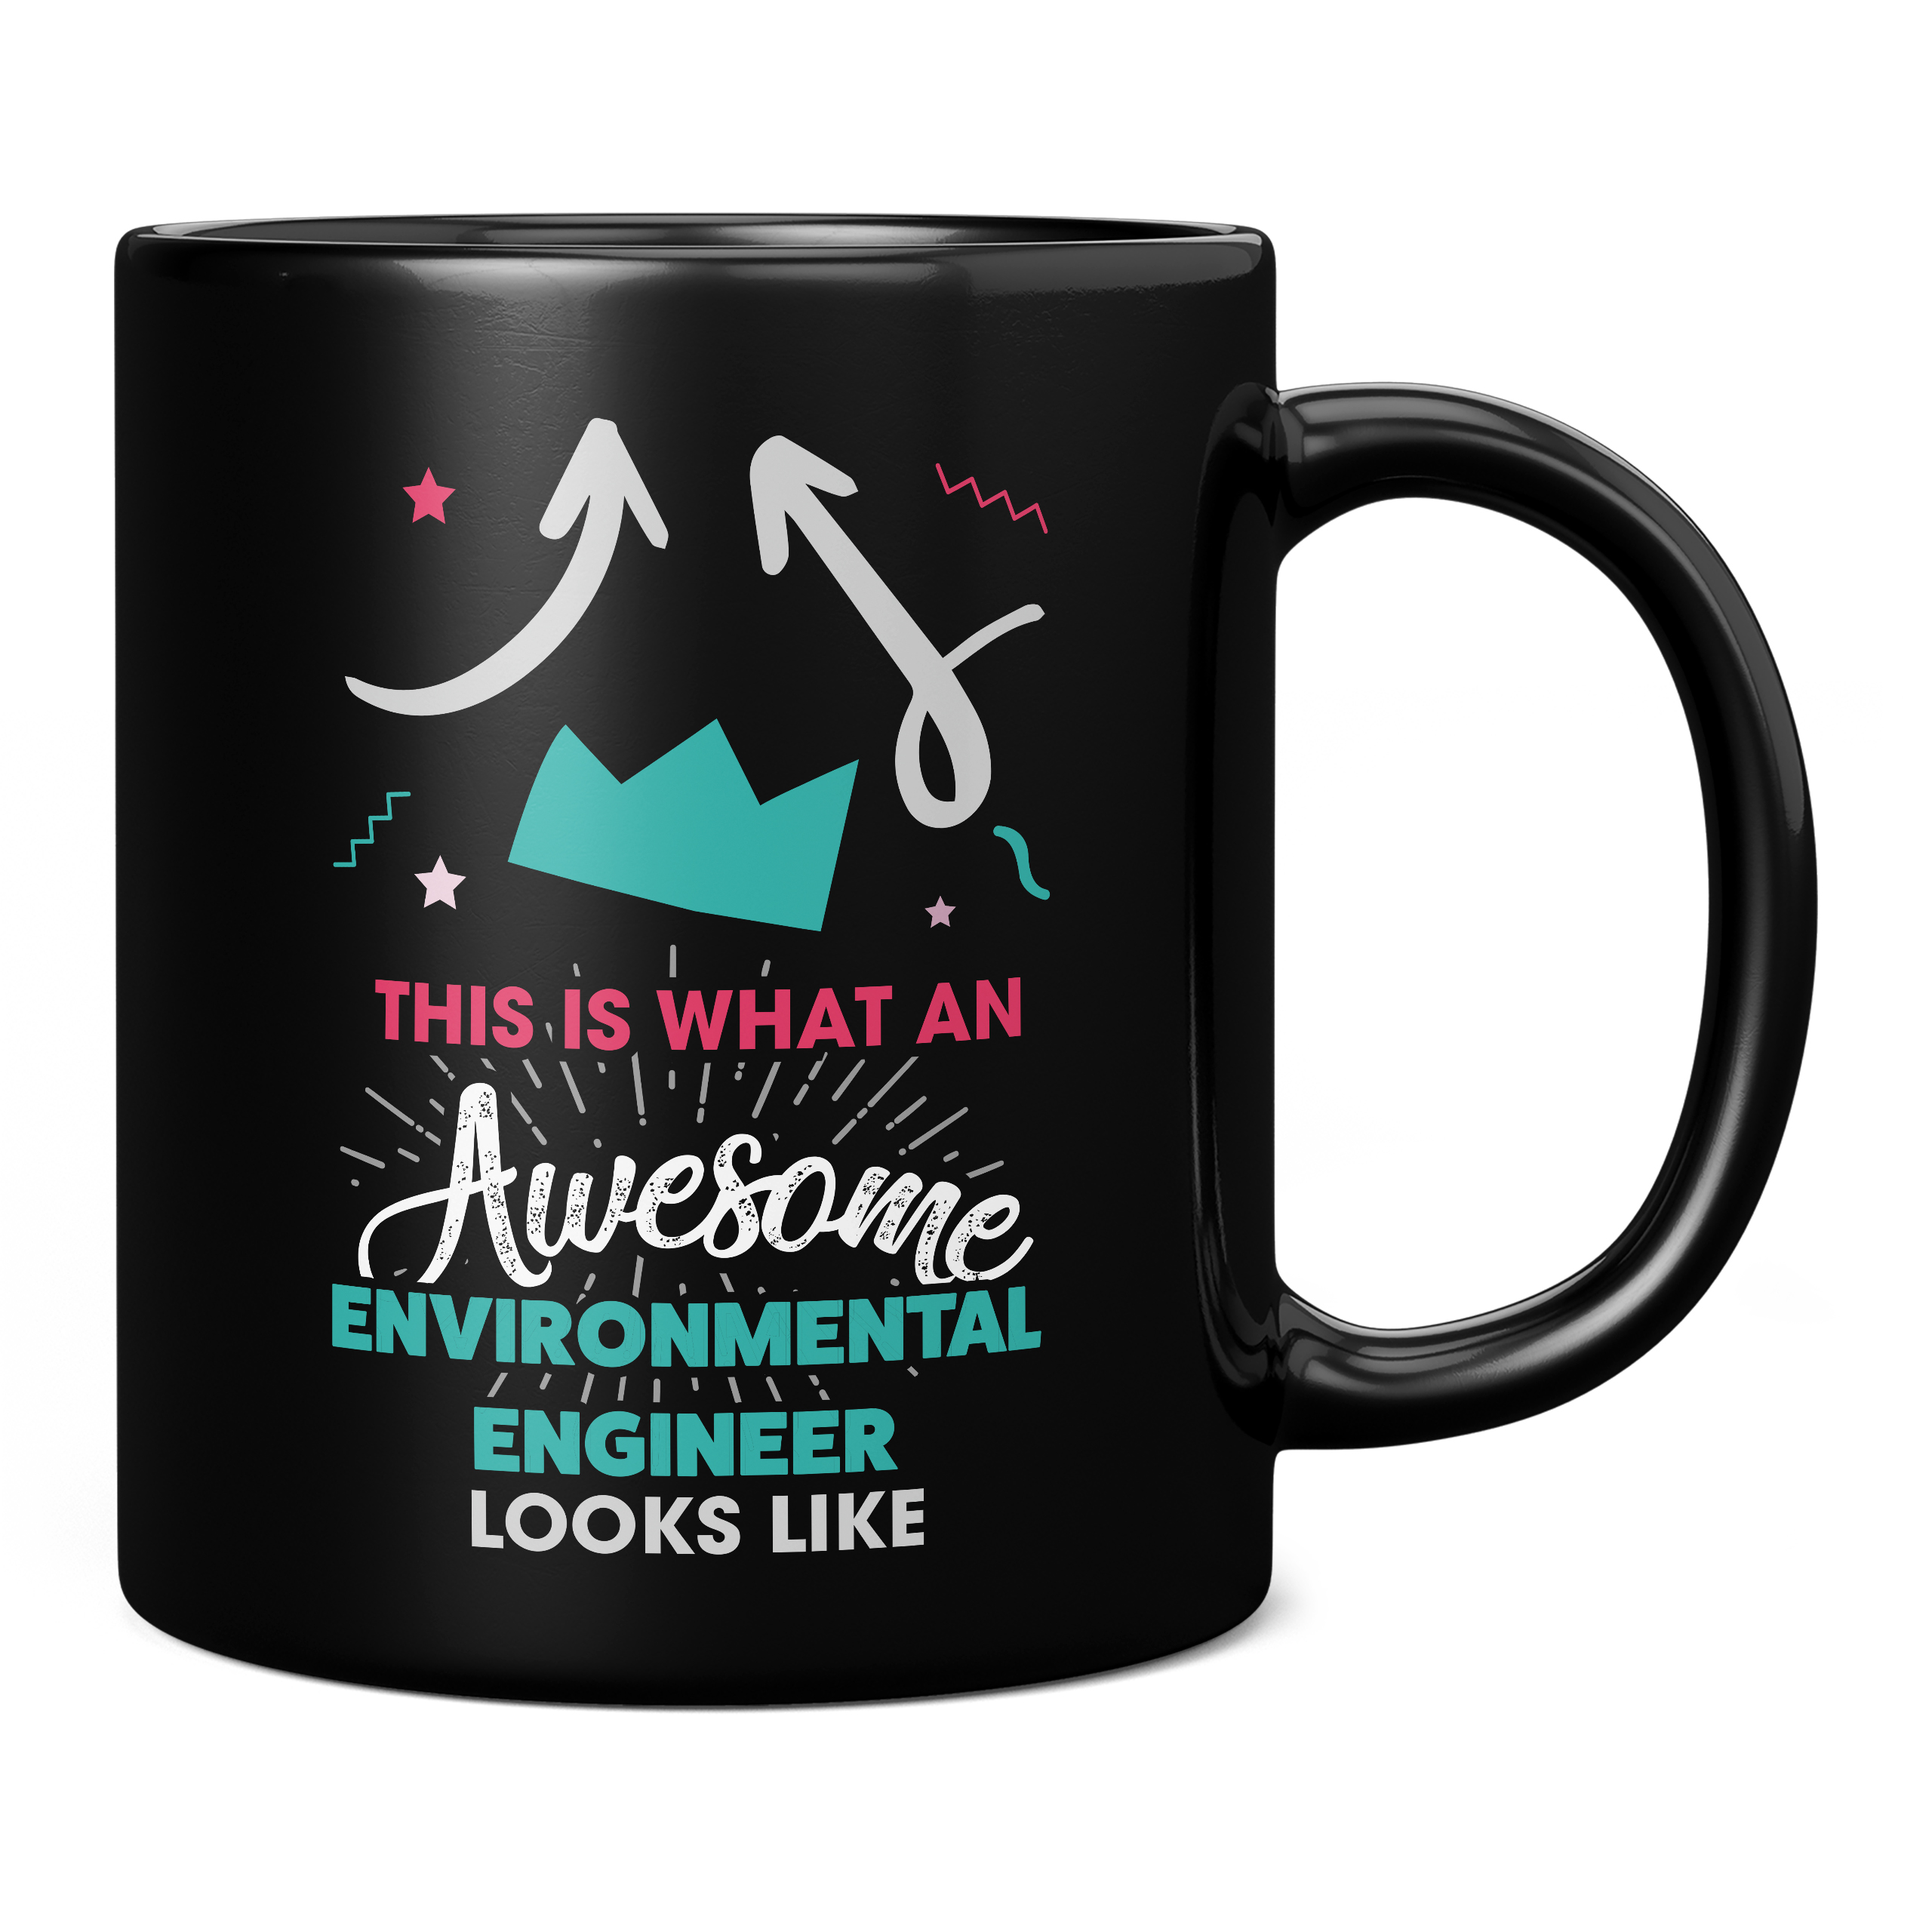 THIS IS WHAT AN AWESOME ENVIRONMENTAL ENGINEER LOOKS LIKE 11OZ NOVELTY MUG